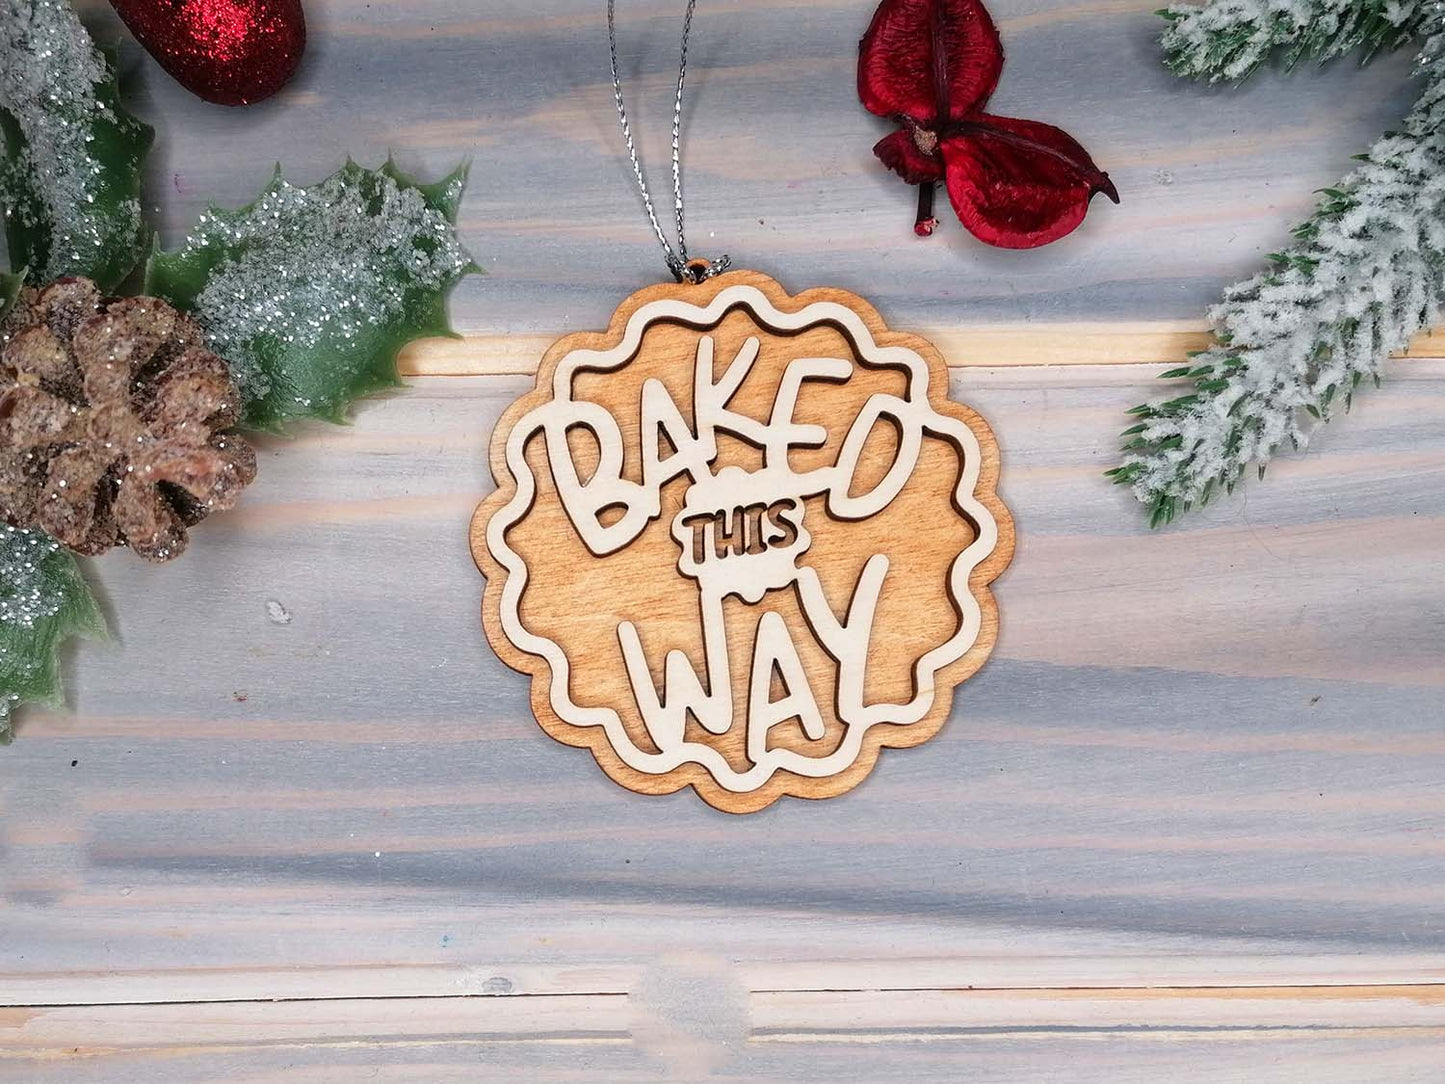 Baked this Way Naughty Christmas Decoration